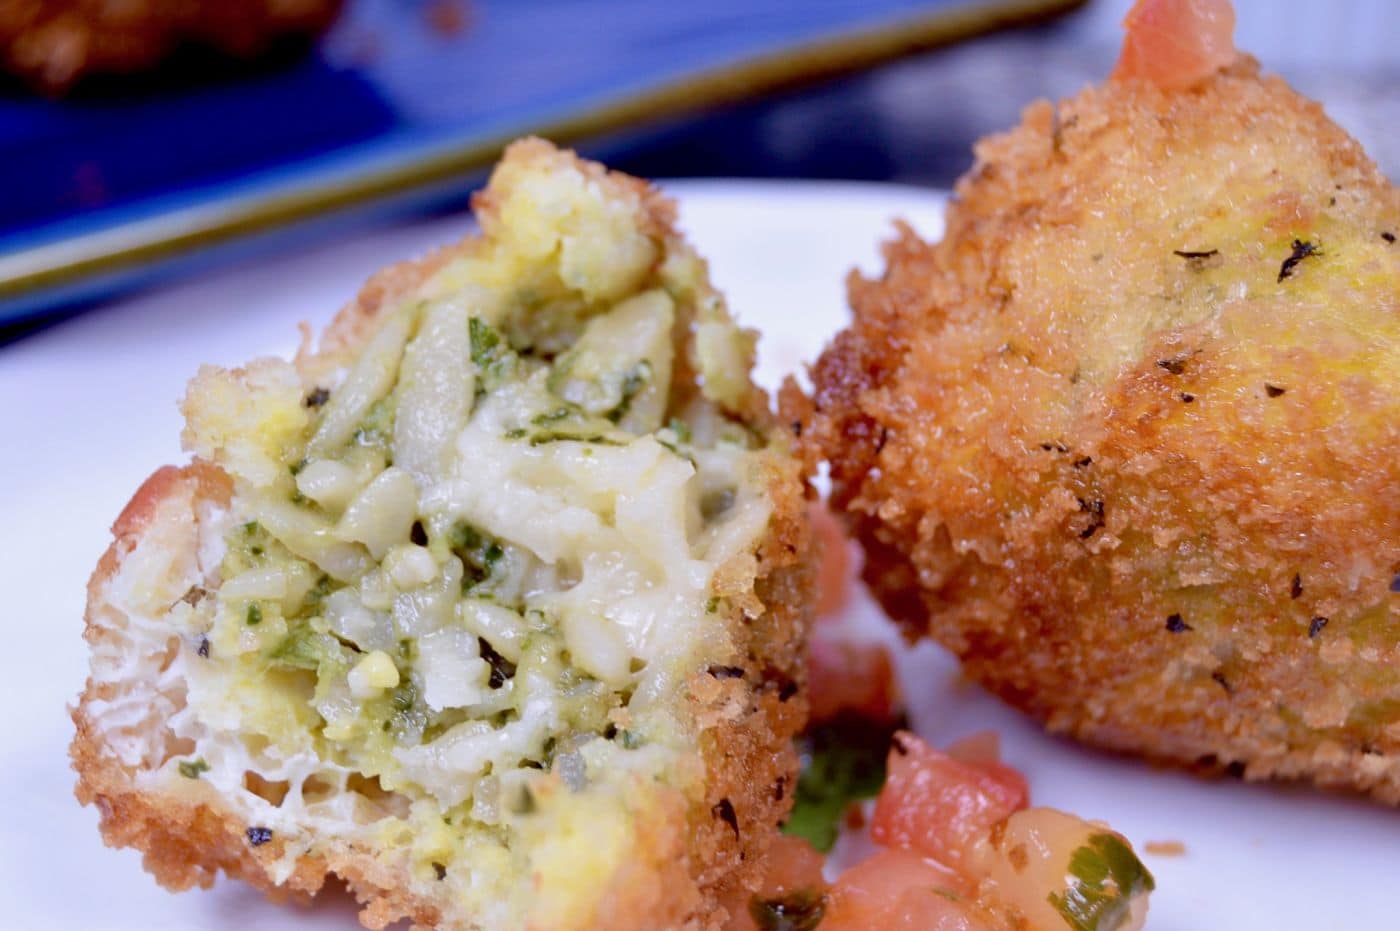 Pesto Pasta Cheese Stuffed croquettes are crunchy outside, oozing with melty cheesy pasta in the center. Warm, comforting and filling so you can easily make one batch for a party!